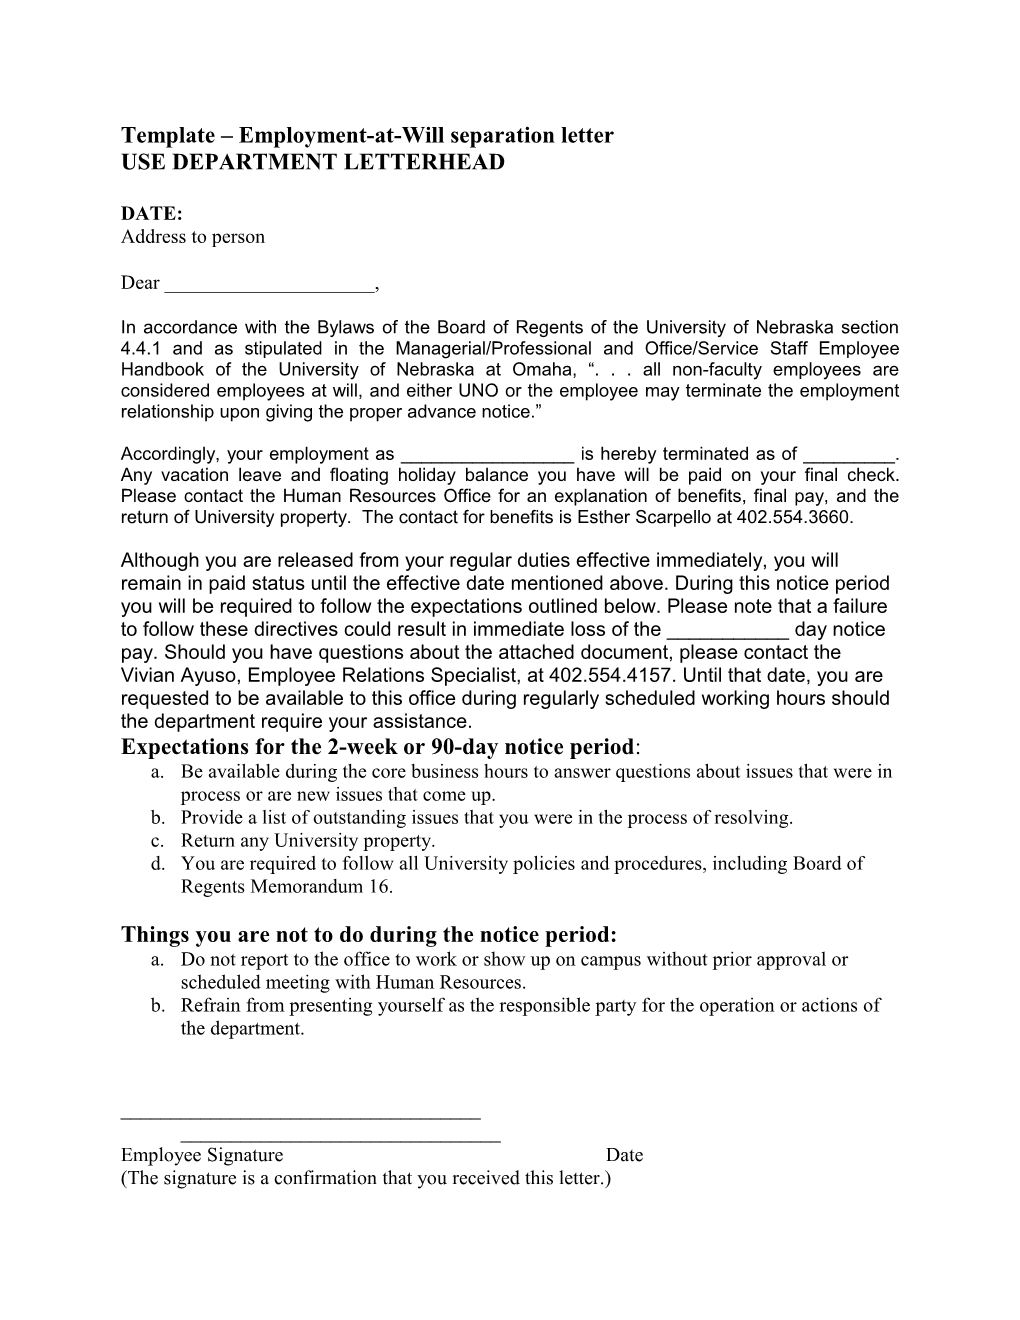 Template Employment-At-Will Separation Letter